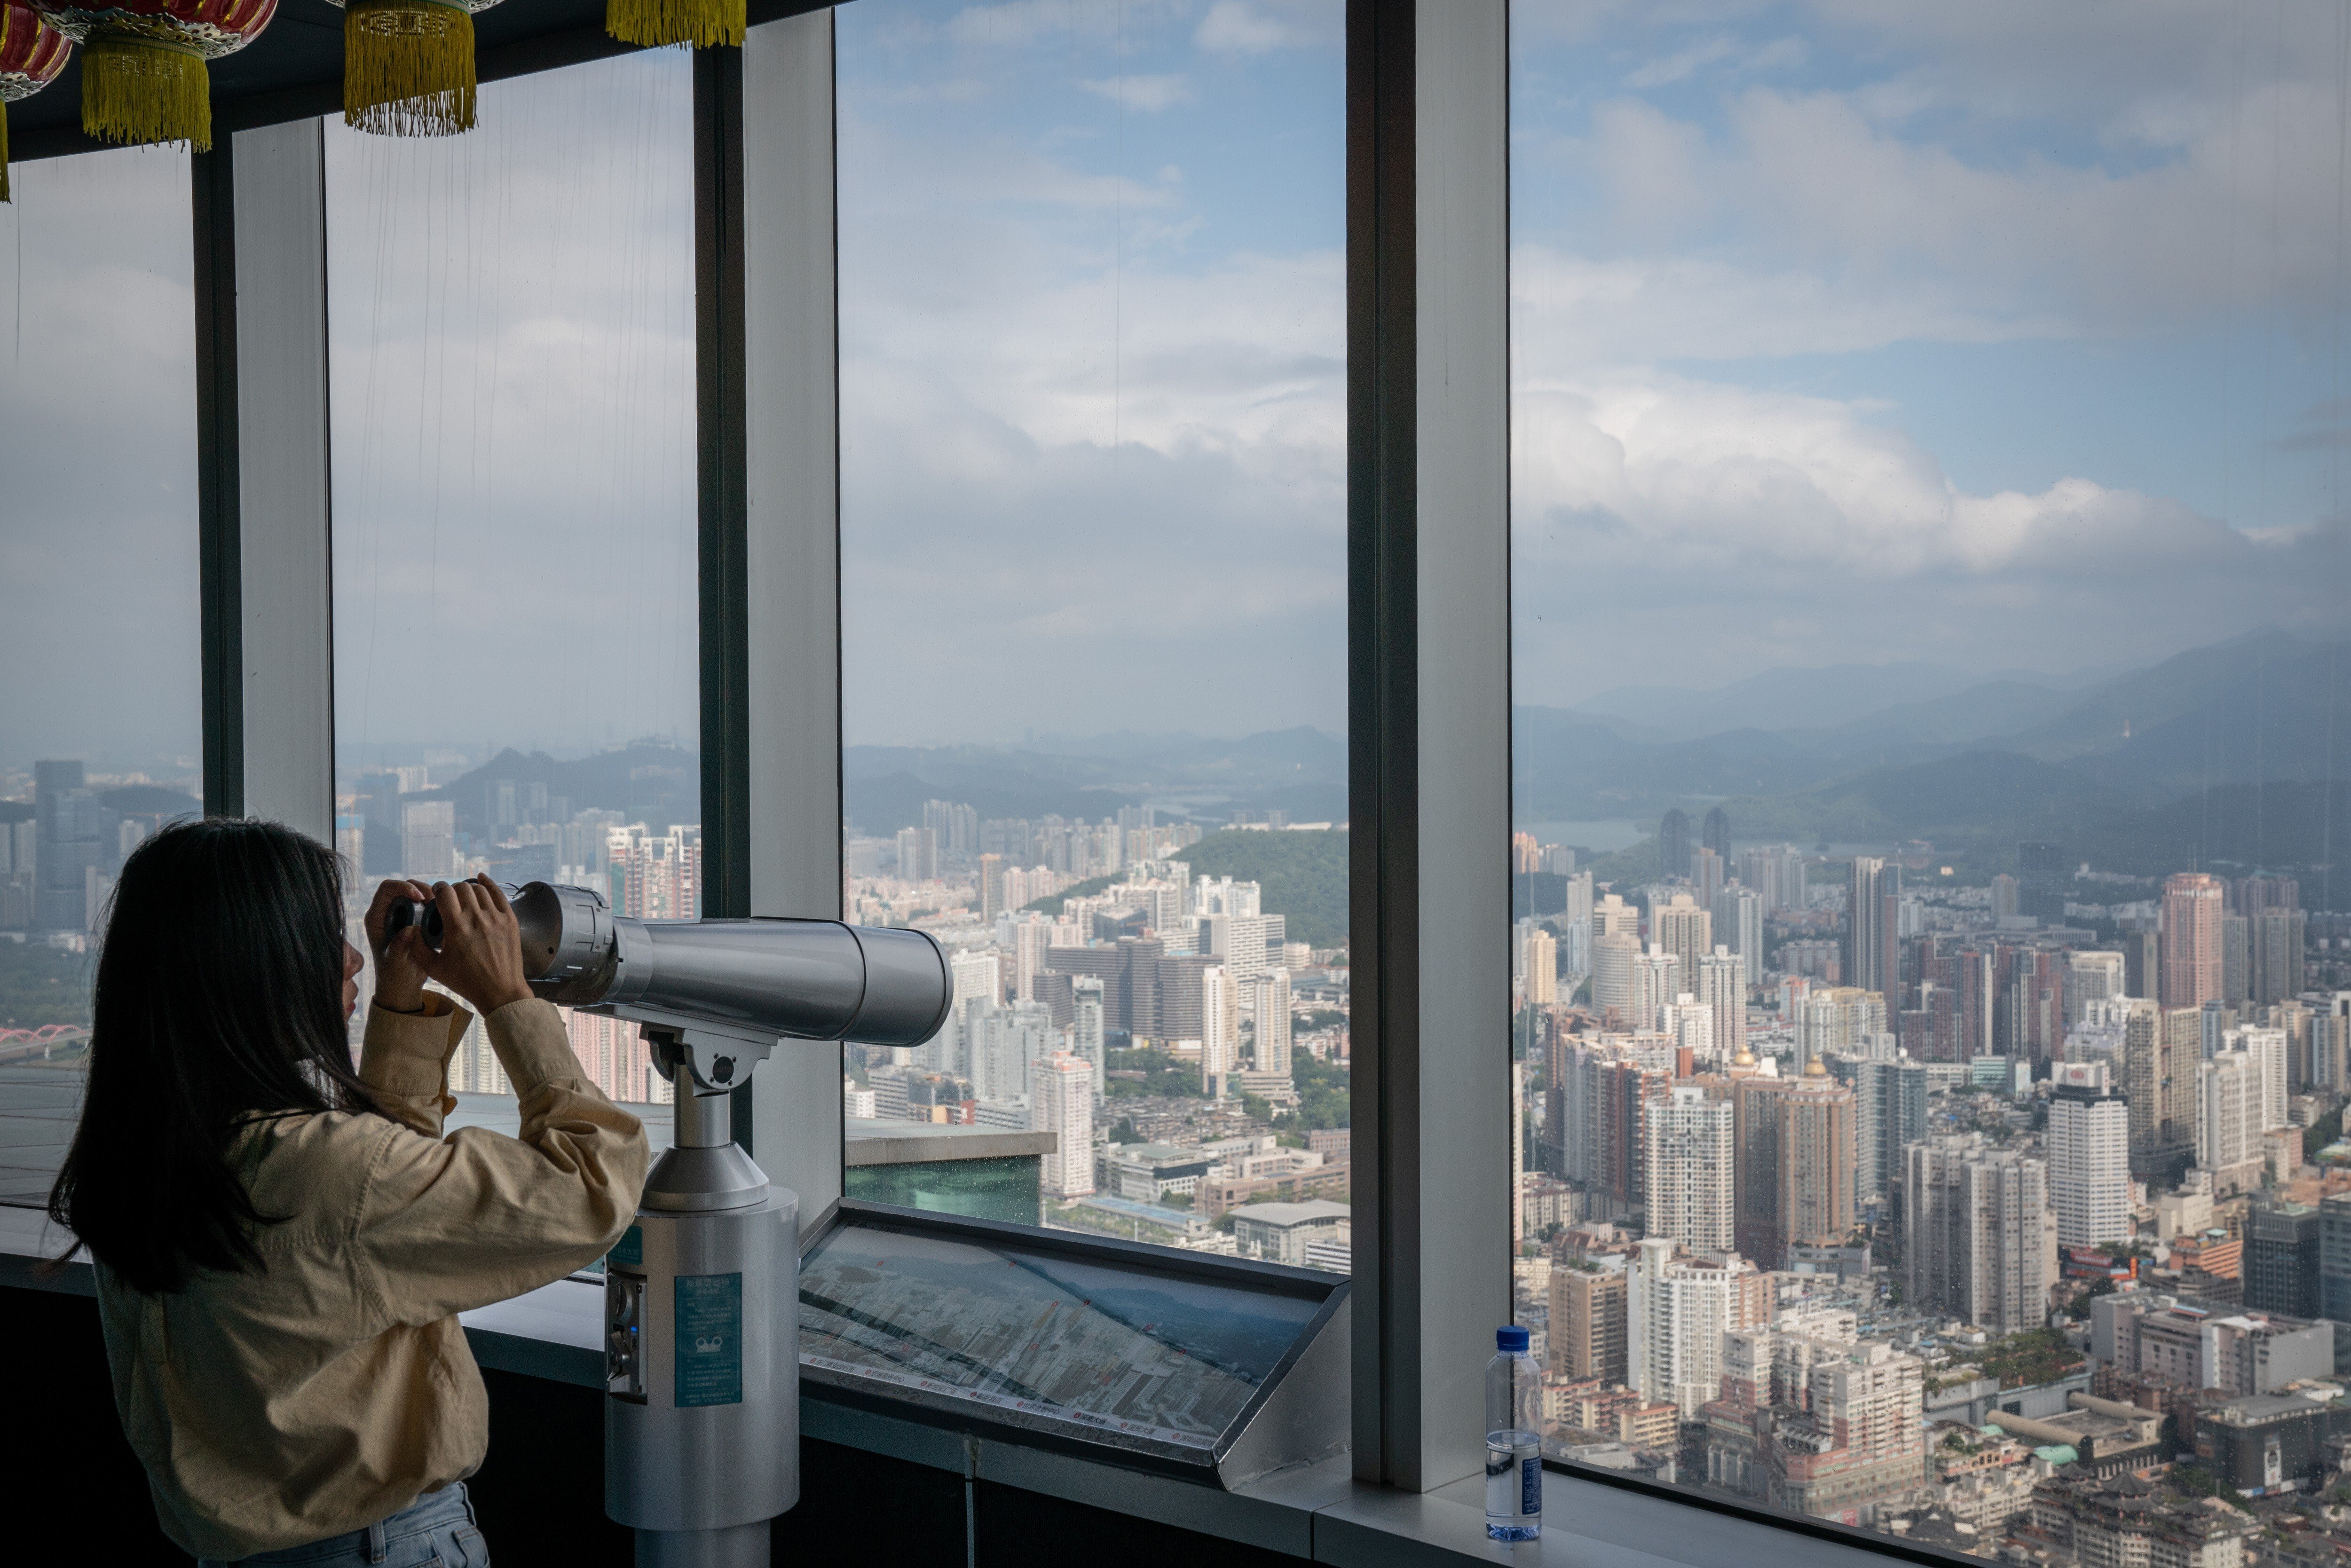 Shenzhen has grabbed headlines for its impressive economic growth and status as China’s hi-tech capital. Photo: Bloomberg